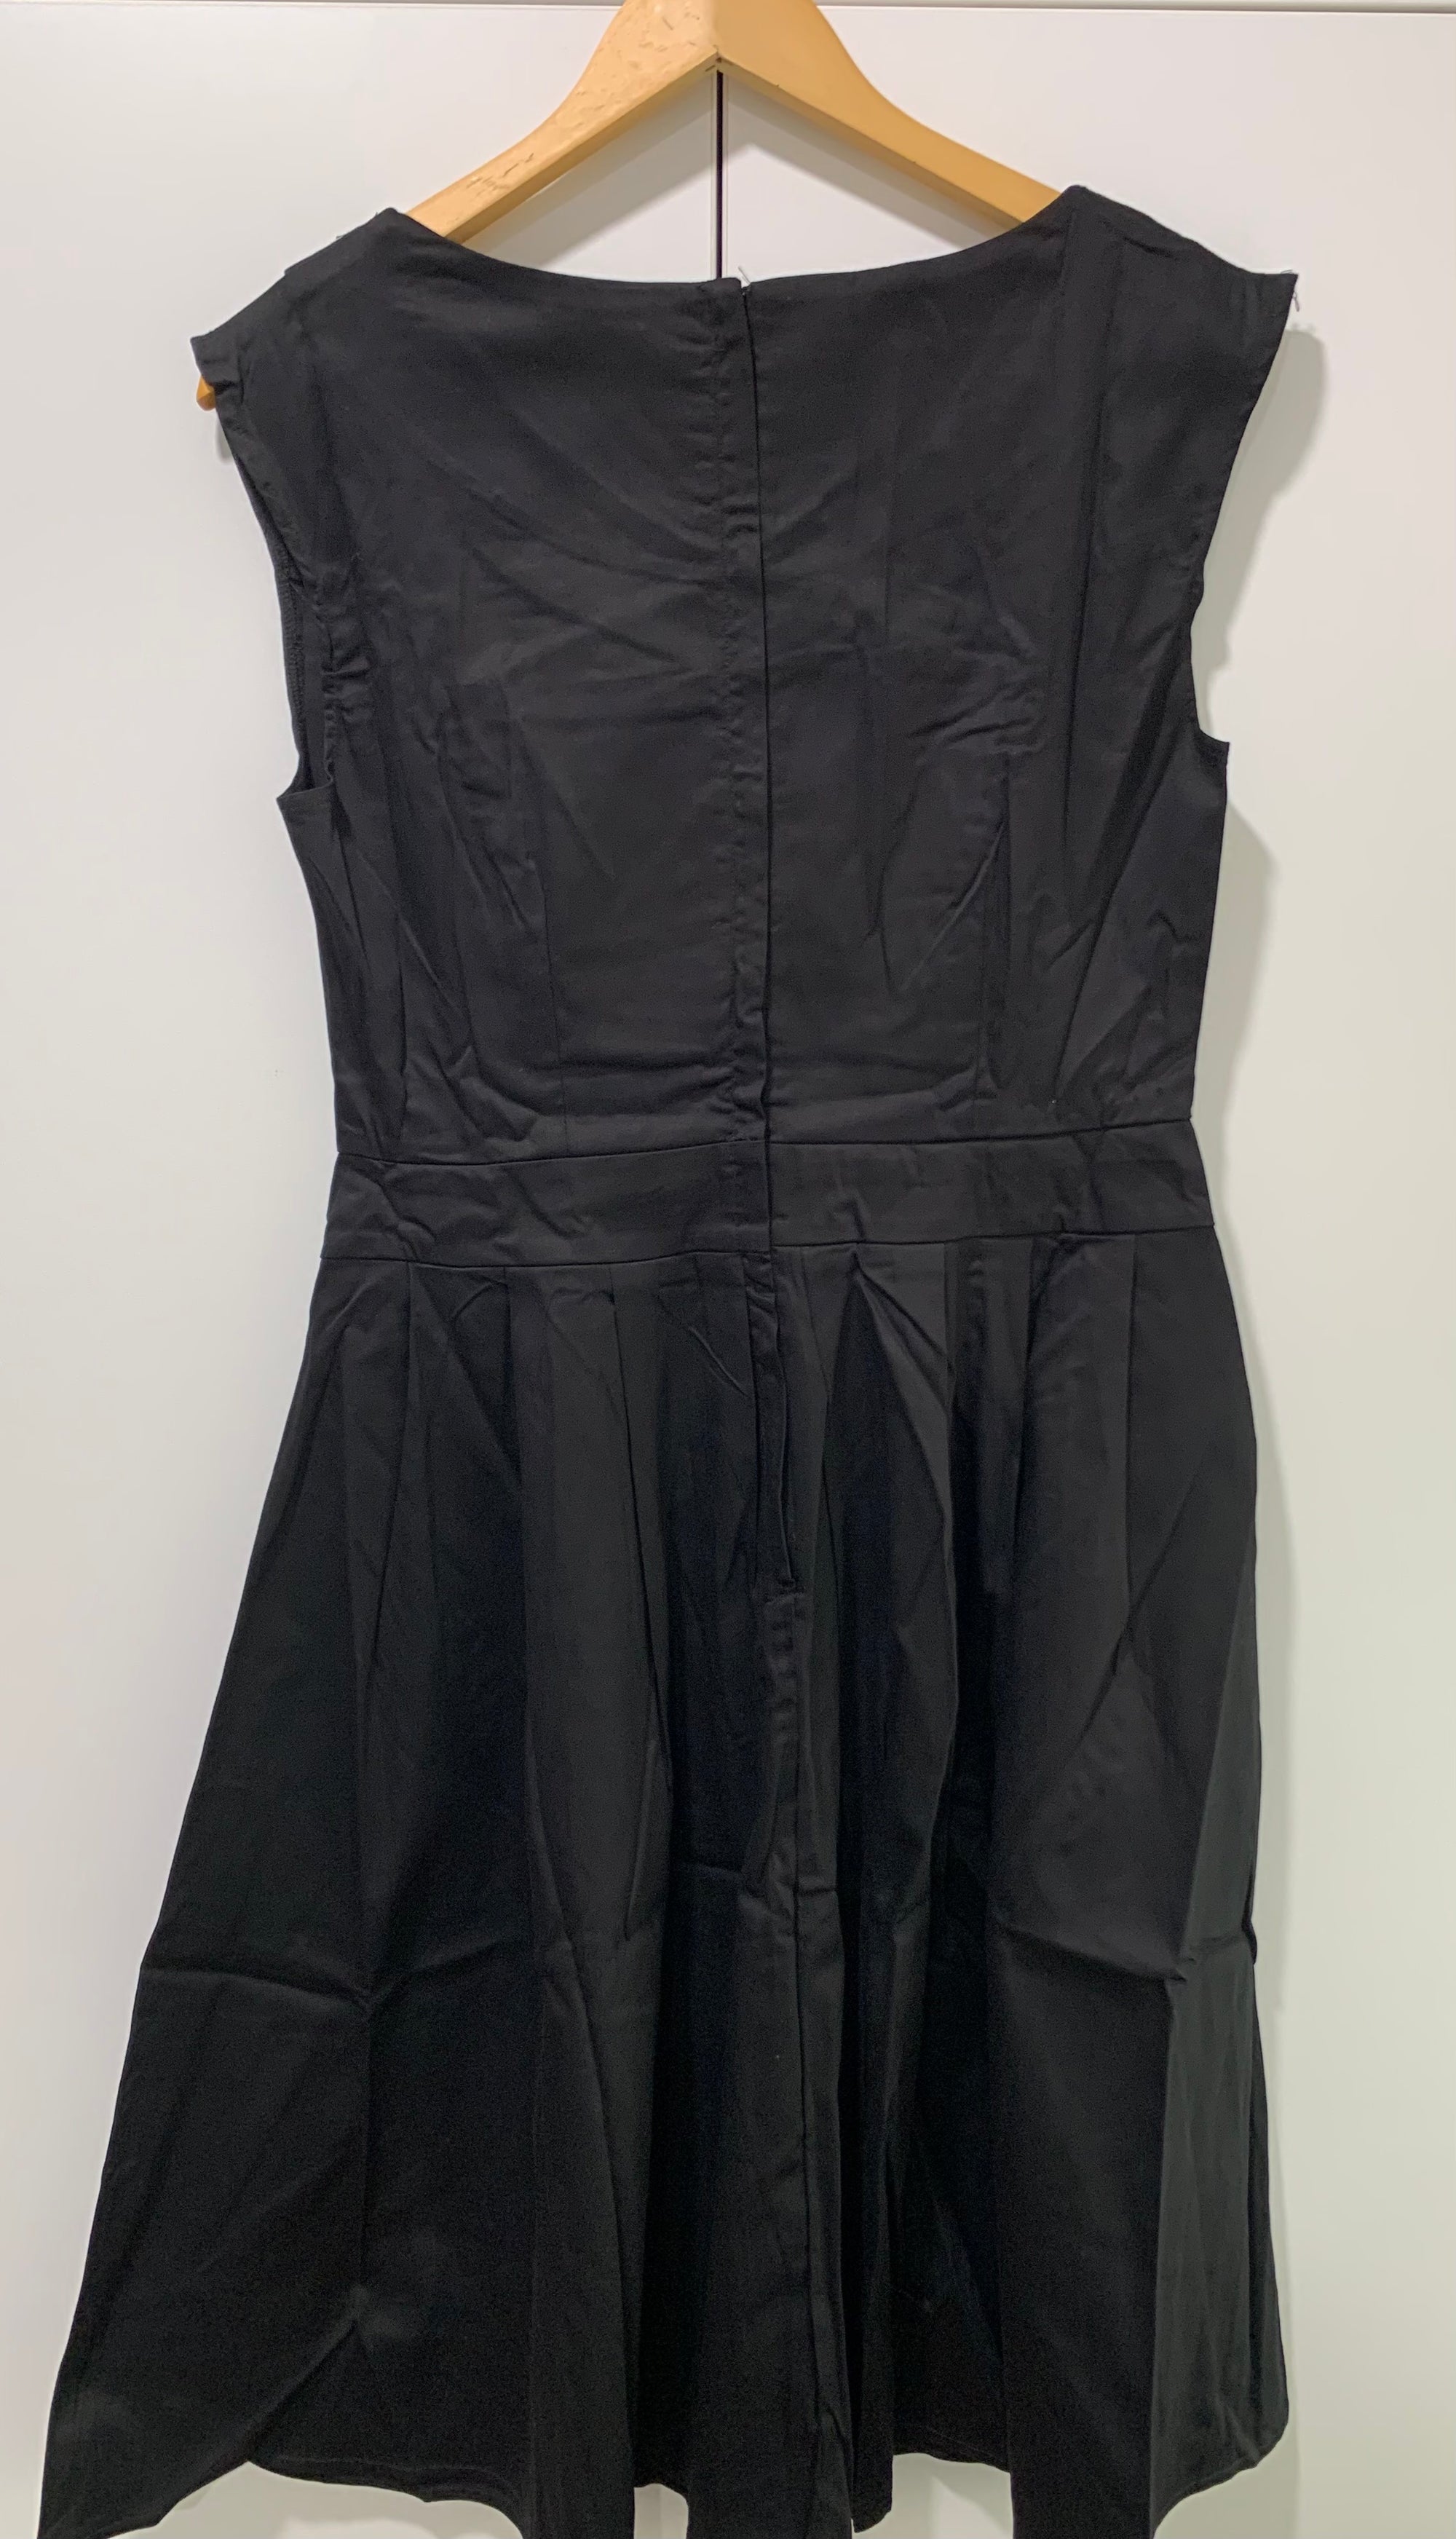 Timeless by Vanessa Tong Classic Black Vintage/Retro Dress Sizes 8-18